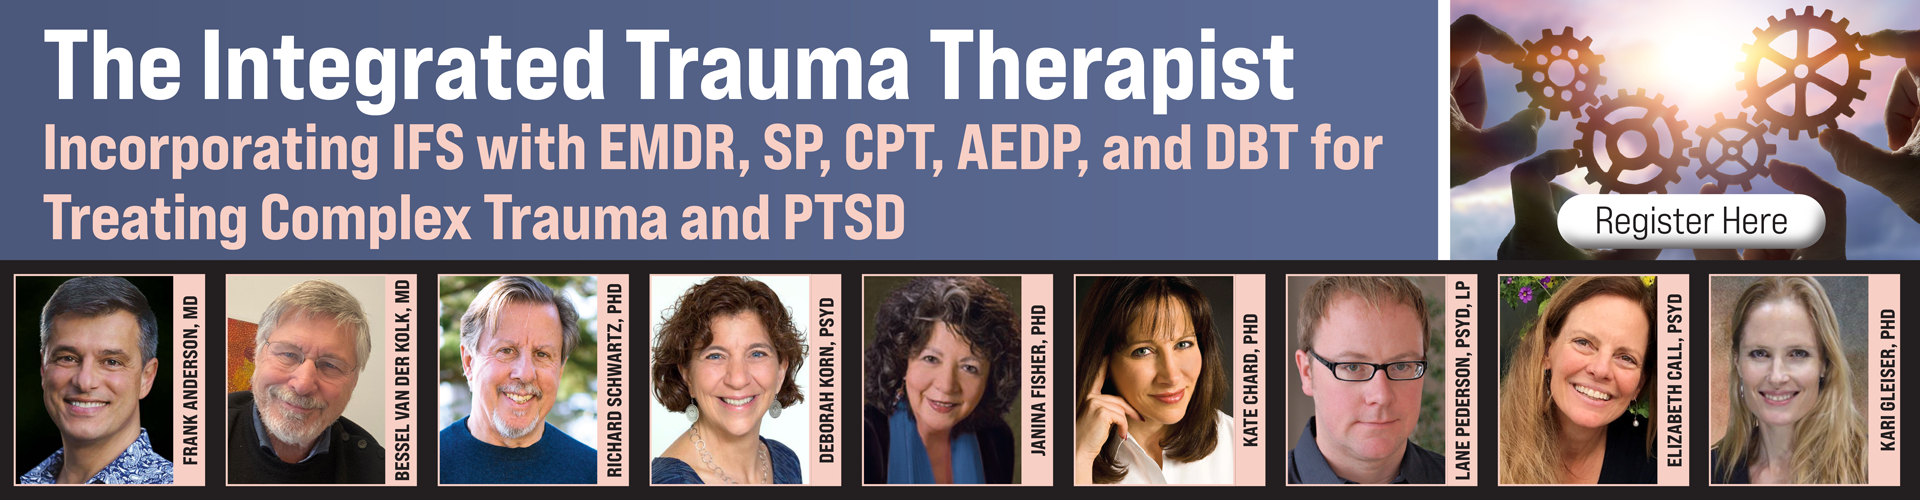 The Integrated Trauma Therapist: Incorporating IFS with EMDR, SP, CPT, AEDP, DBT, and Psychedelic Medicines for Treating Complex Trauma and PTSD